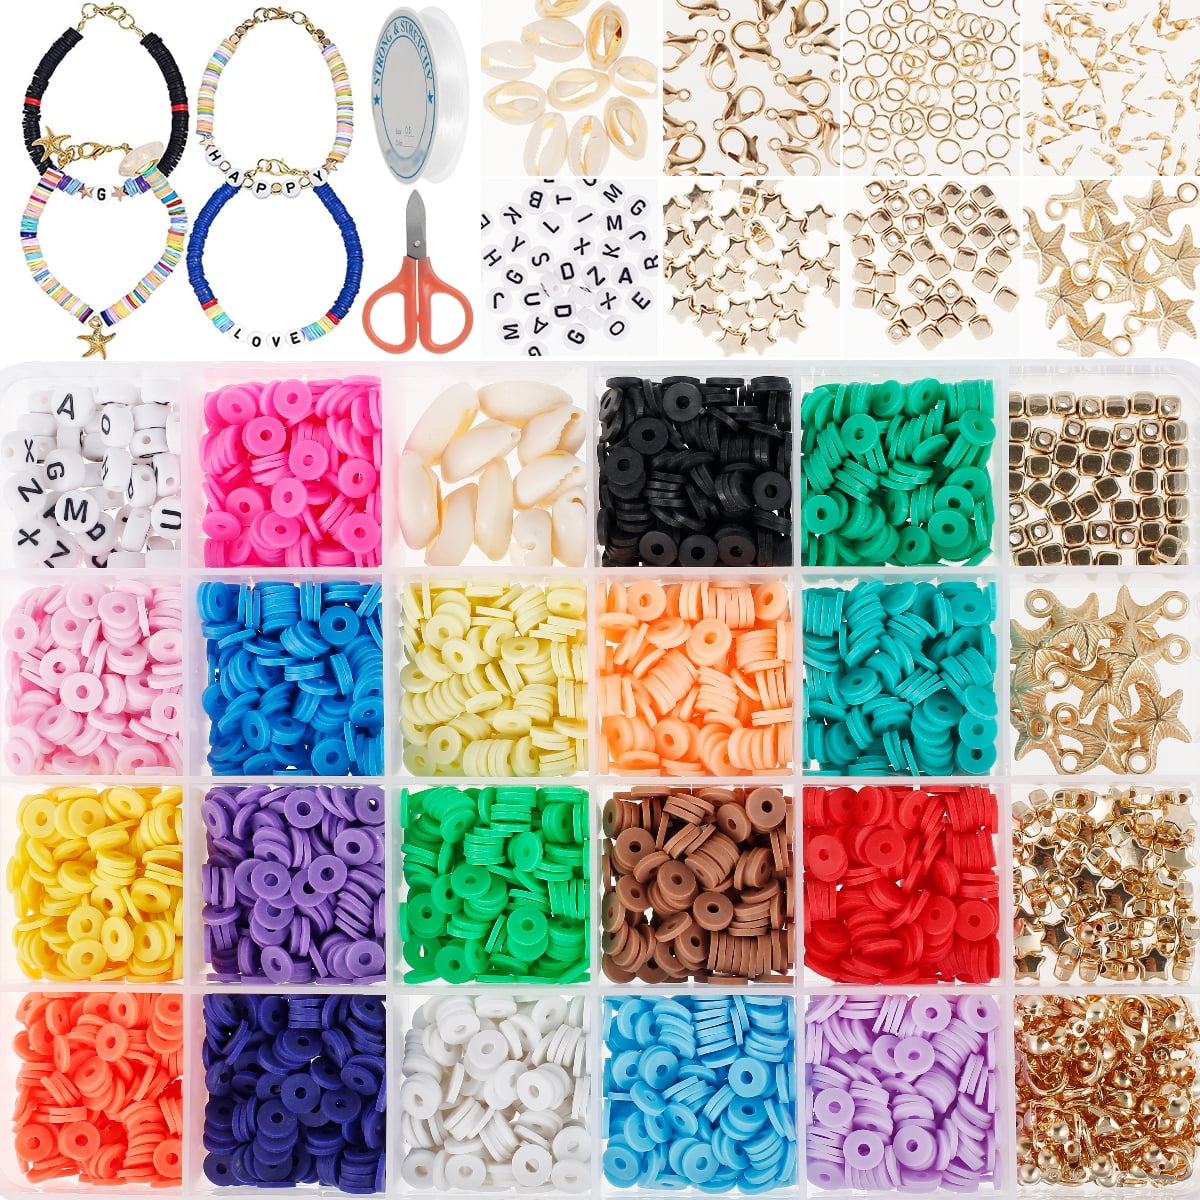 50 Pieces European Large Hole Spacer Beads Assortments Charm Beads  Rhinestone Beads Supplies For Necklace Bracelets Jewelry Making 